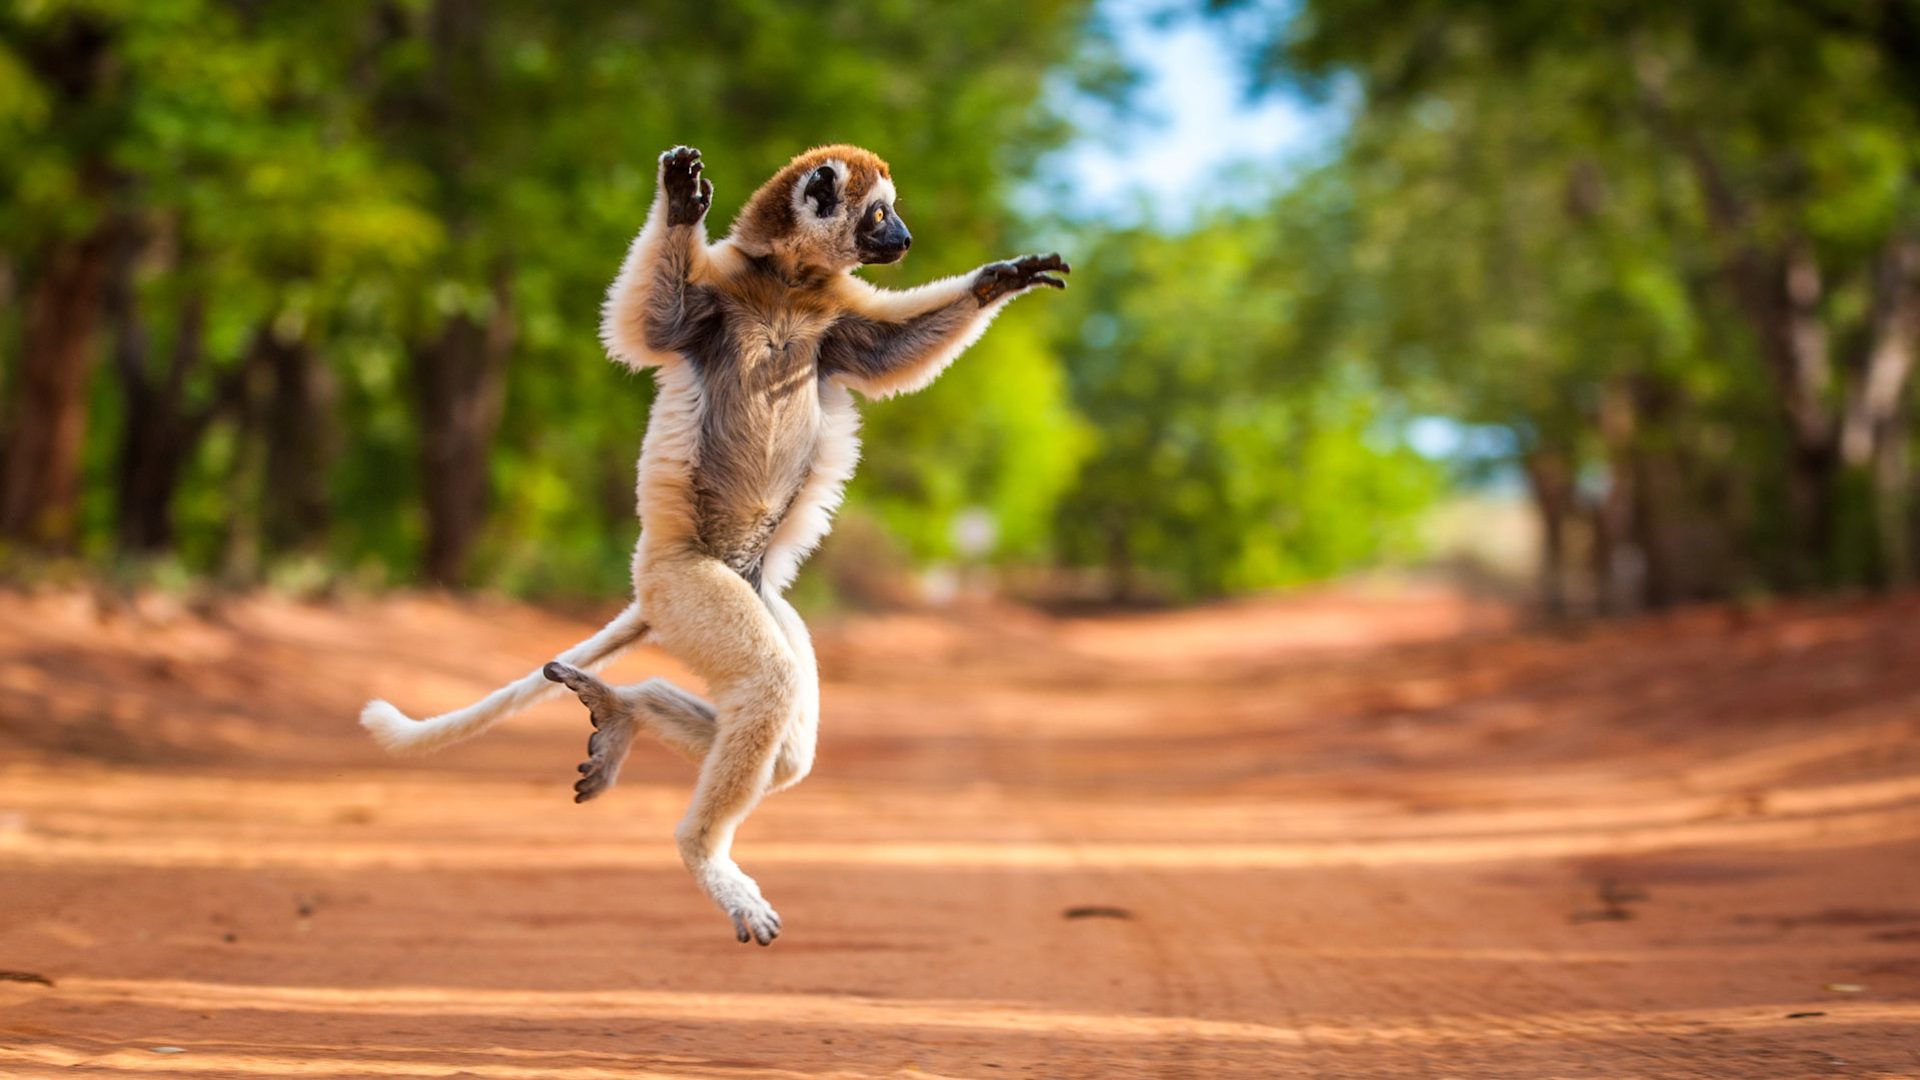 Verreaux's sifaka photographed in the Berenty Reserve of Madagascar.